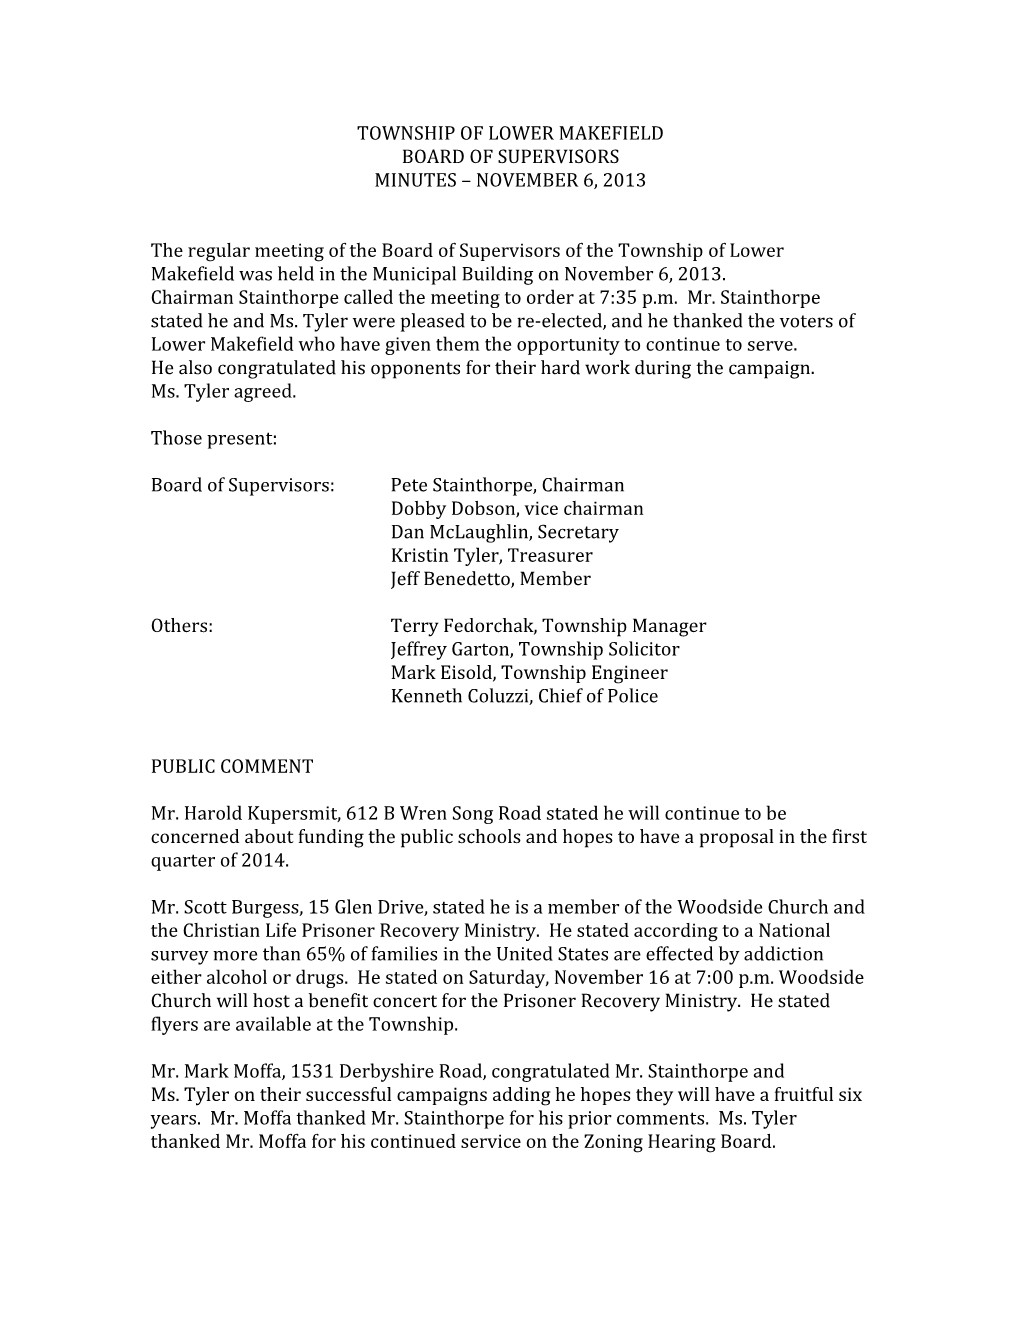 TOWNSHIP of LOWER MAKEFIELD BOARD of SUPERVISORS MINUTES – NOVEMBER 6, 2013 the Regular Meeting of The